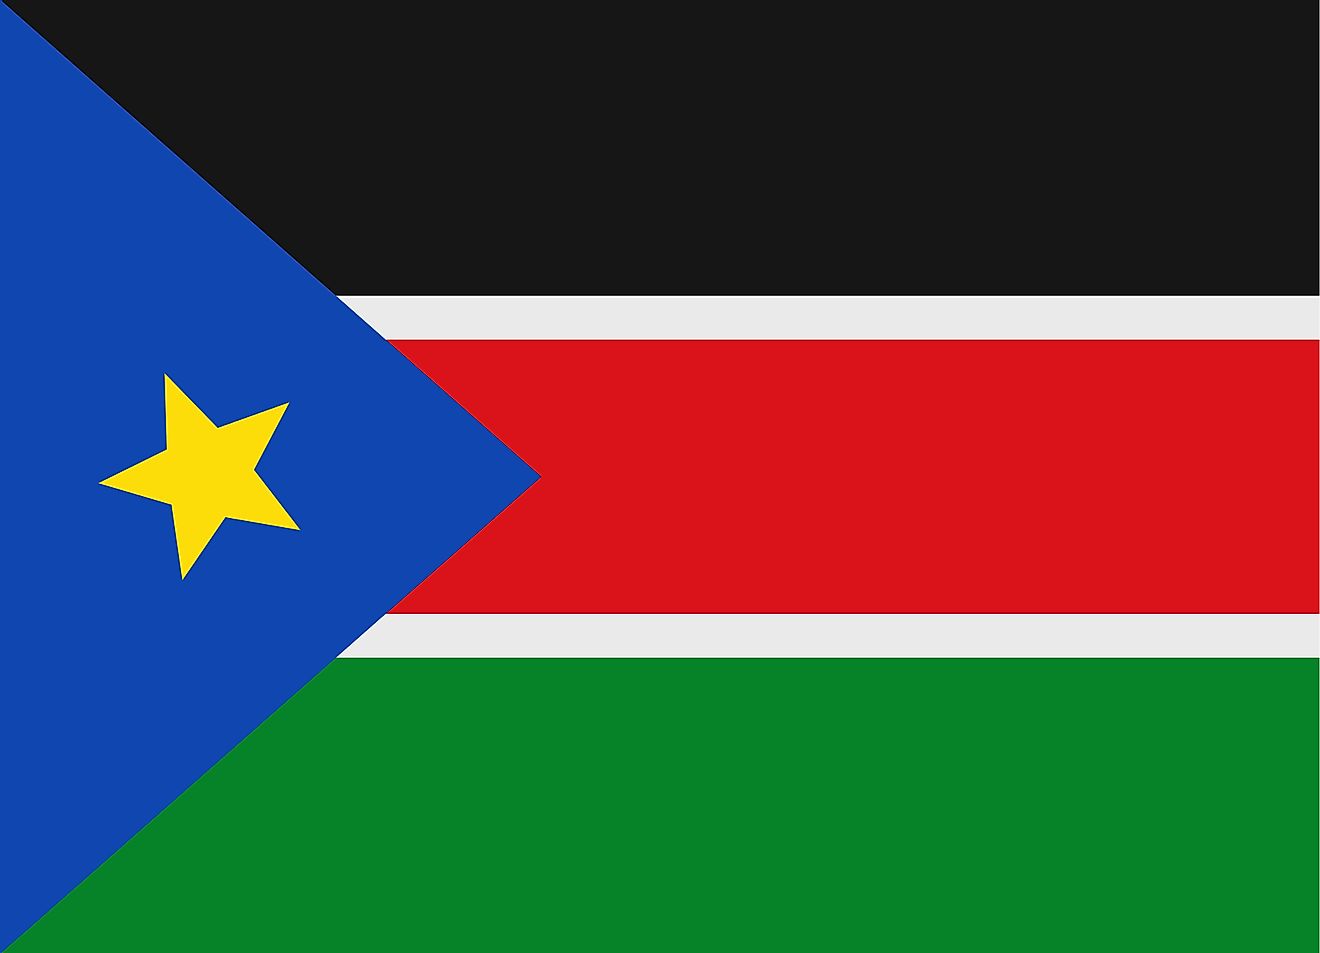 The National Flag of South Sudan featured three equal horizontal bands of black (top), red, and green. The red band is edged in white and a blue isosceles triangle is based on the hoist side of the flag containing a gold, five-pointed star. 